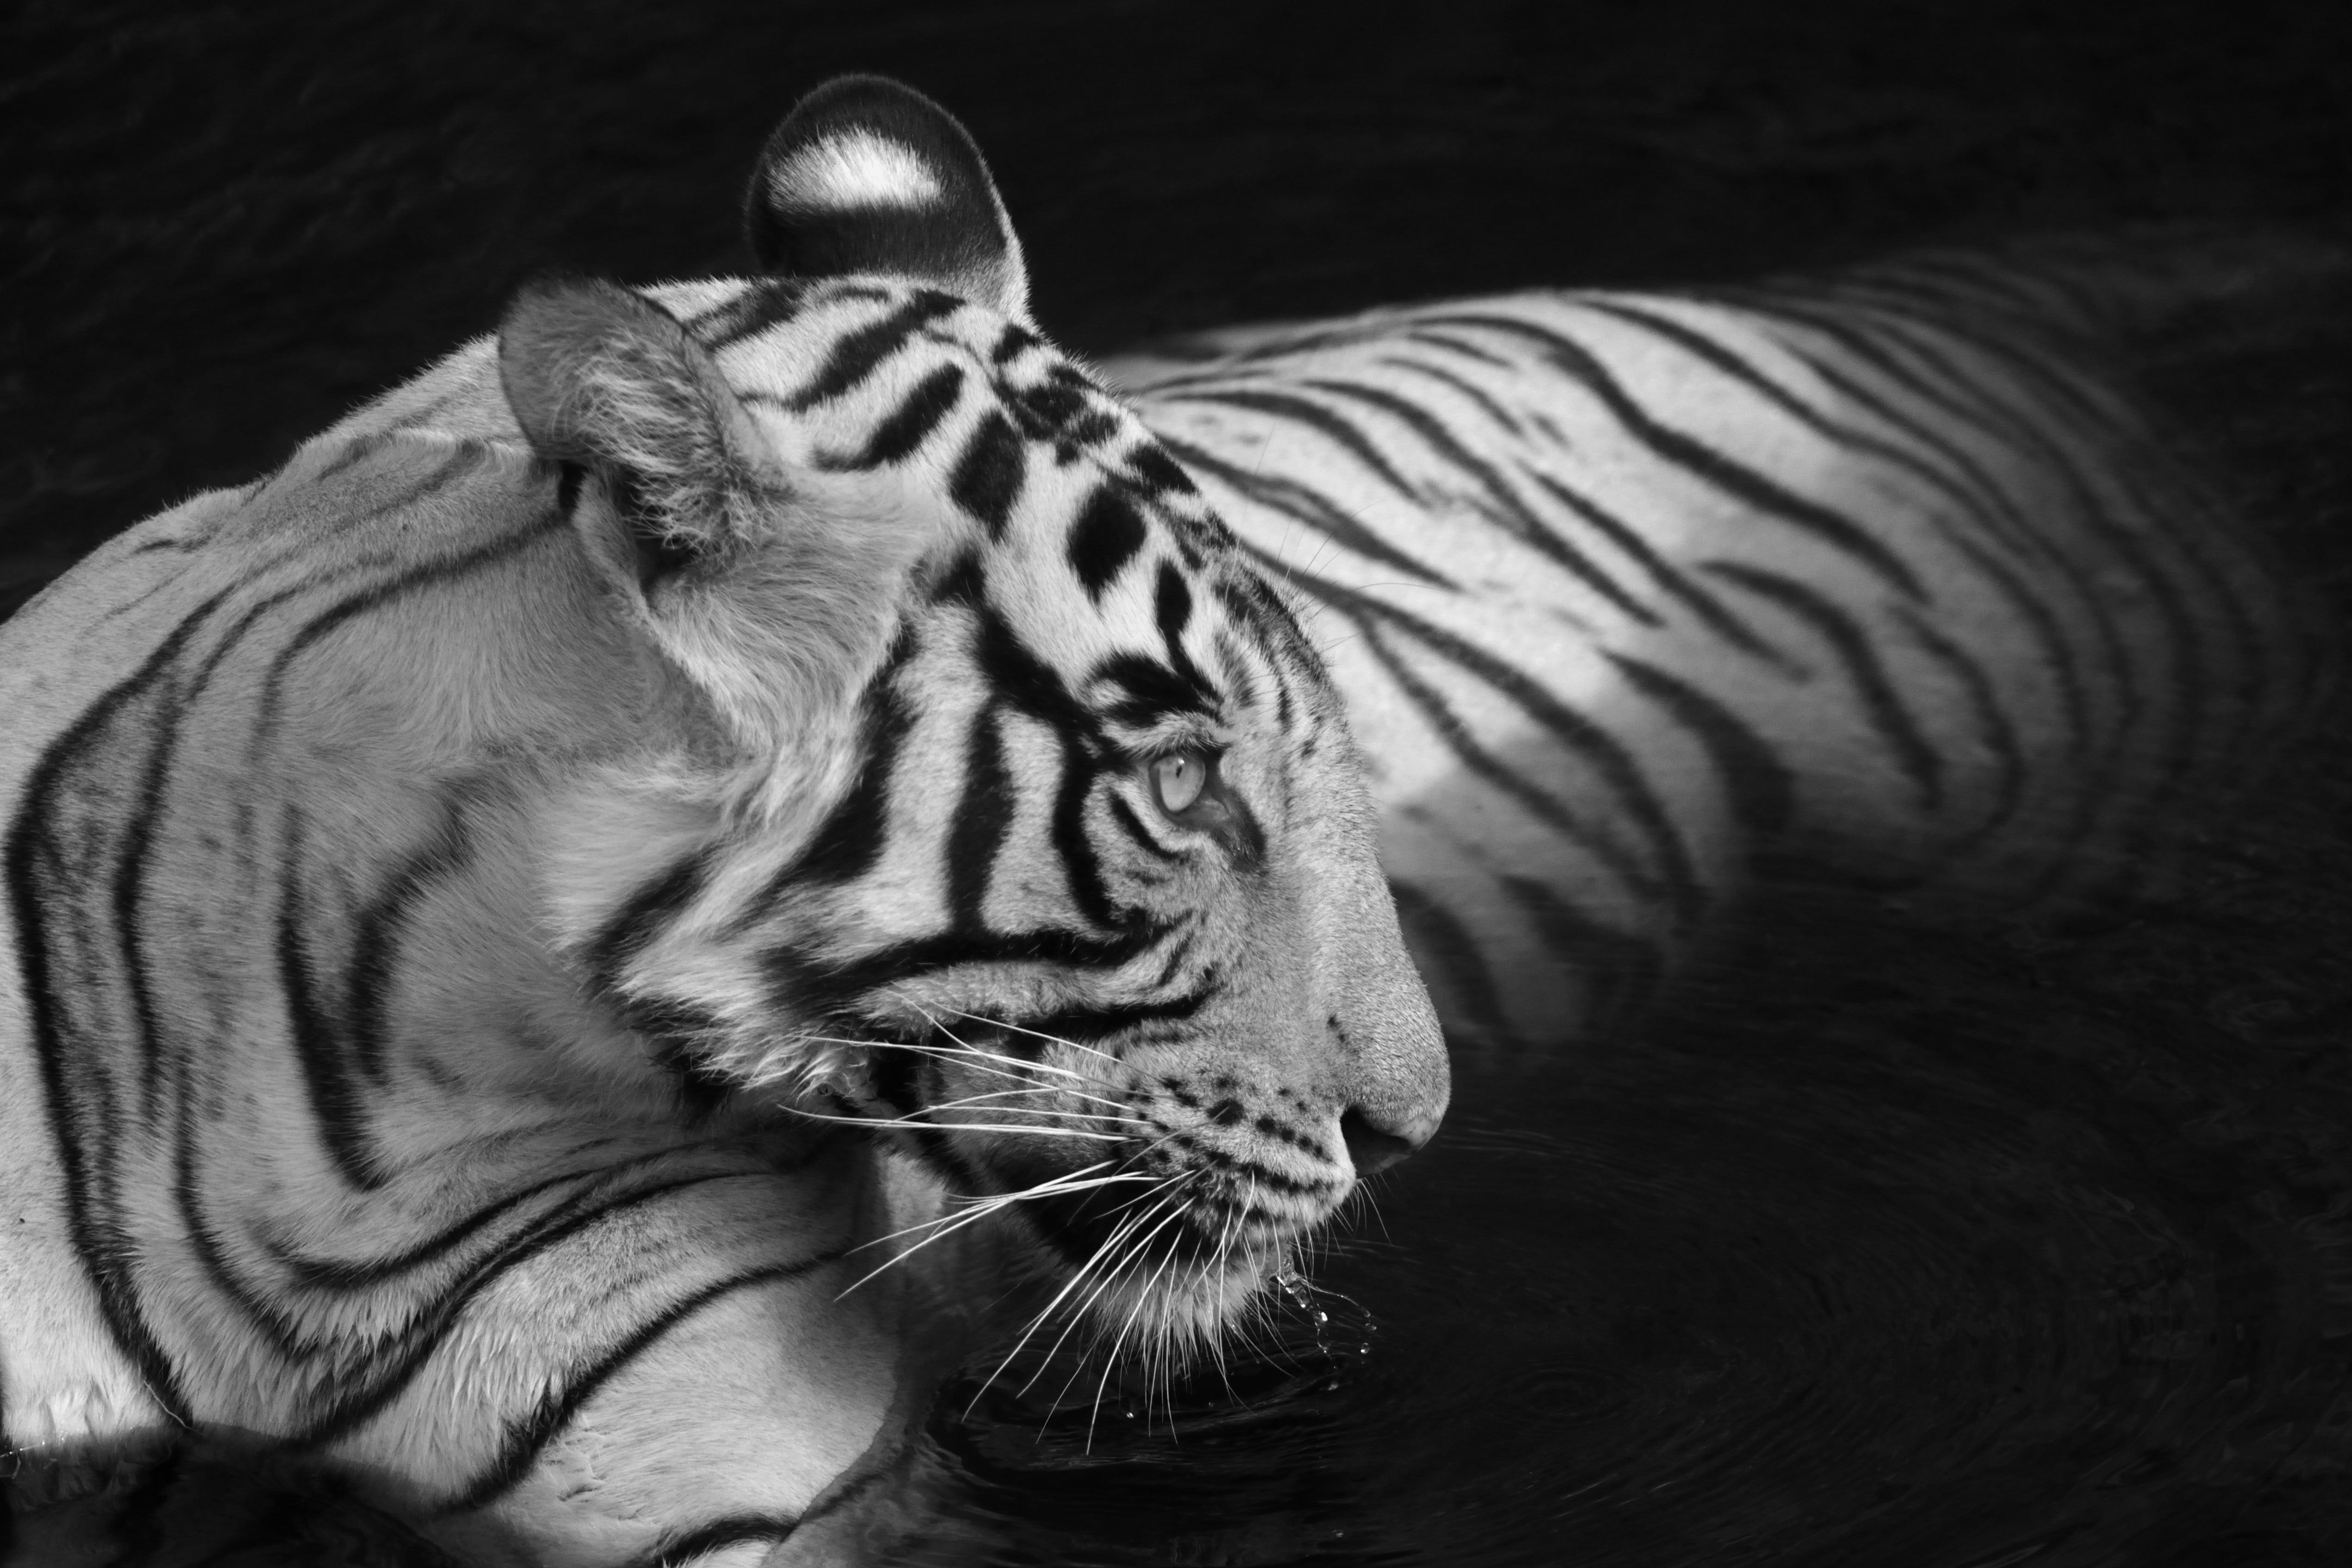 Black and White Photograph Aditya Dicky Singh - Paysage Nature Photographie Animal Grand Noir et Blanc Tigre Eau Lac Inde 